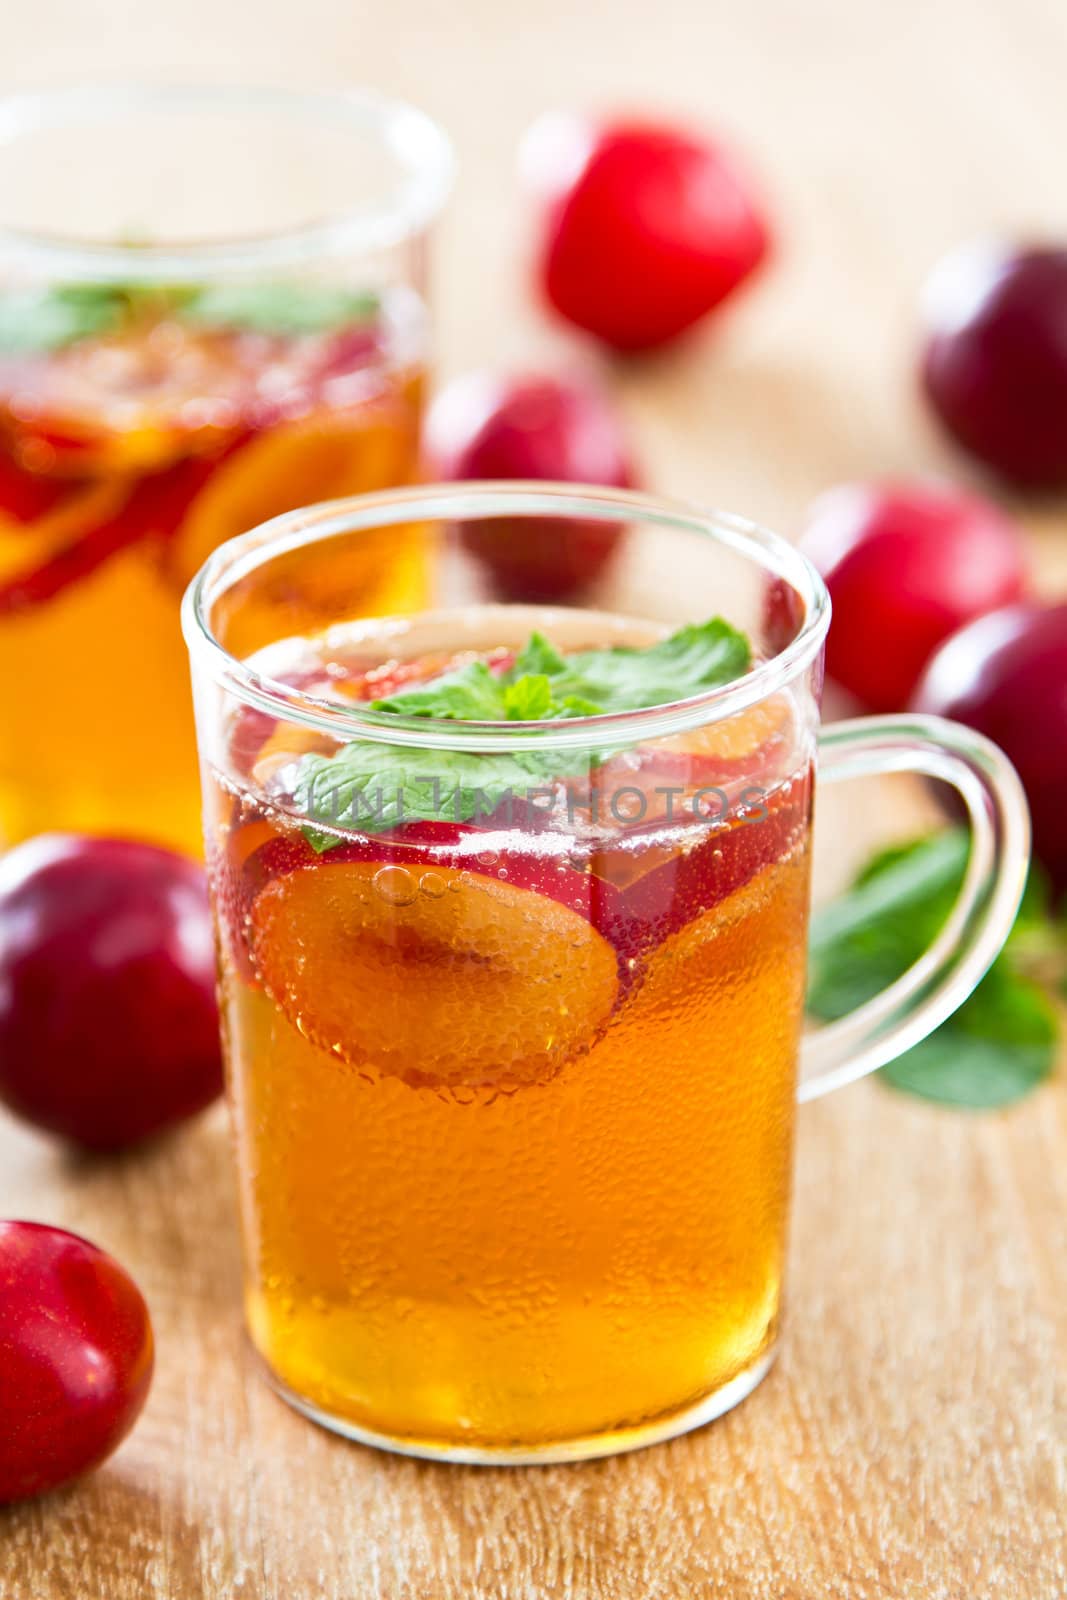 Plum juice with fresh plum and mint